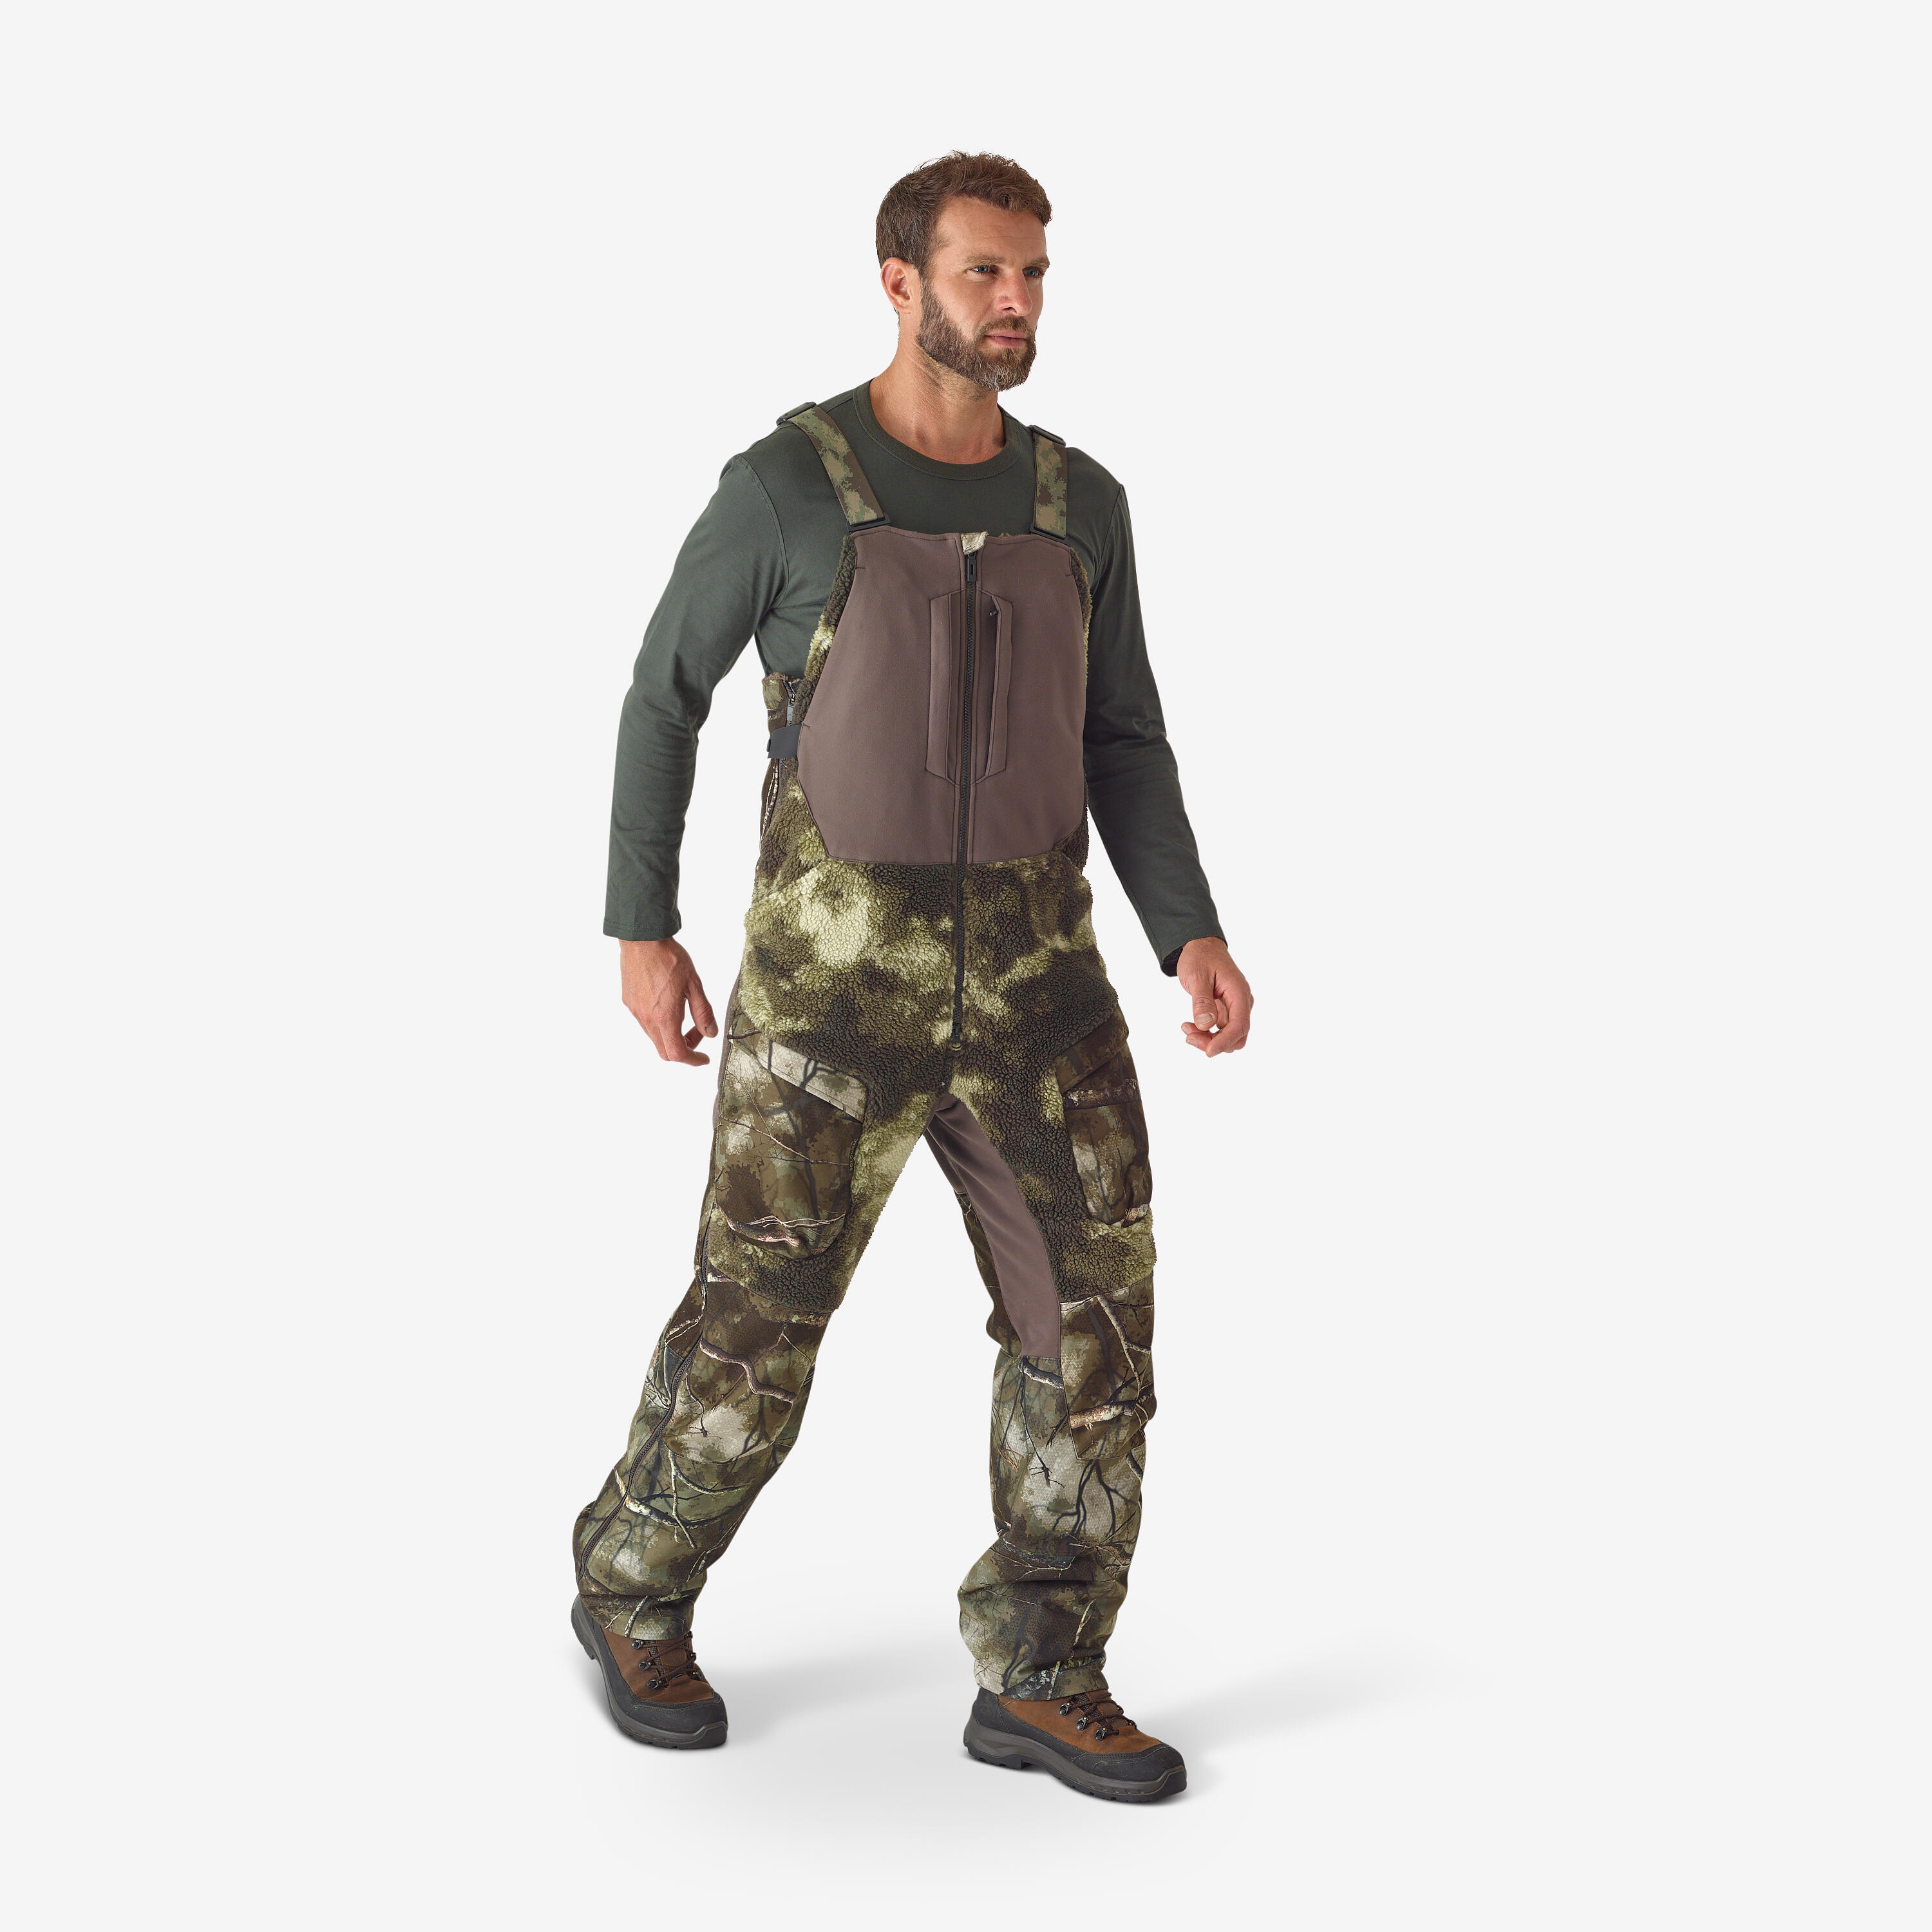 Hunting Silent Breathable Pants - 900 Furtiv Camouflage - Camouflage -  Solognac - Decathlon